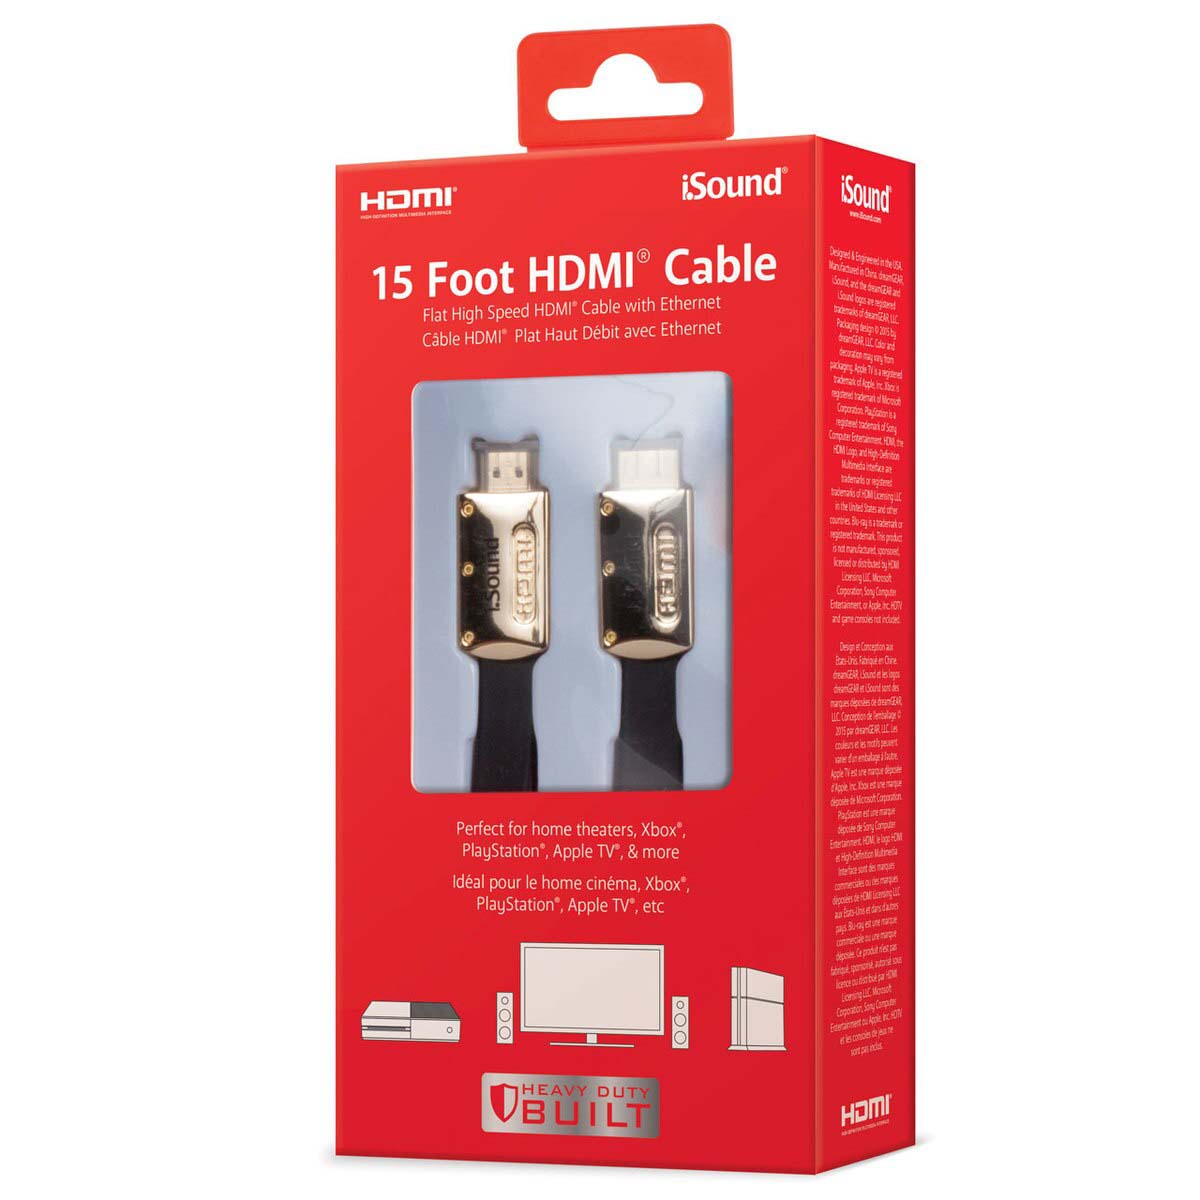 iSOUND HDMI CABLE, HD CONNECT. 15 FOOT LENGTH, BLACK, 6816